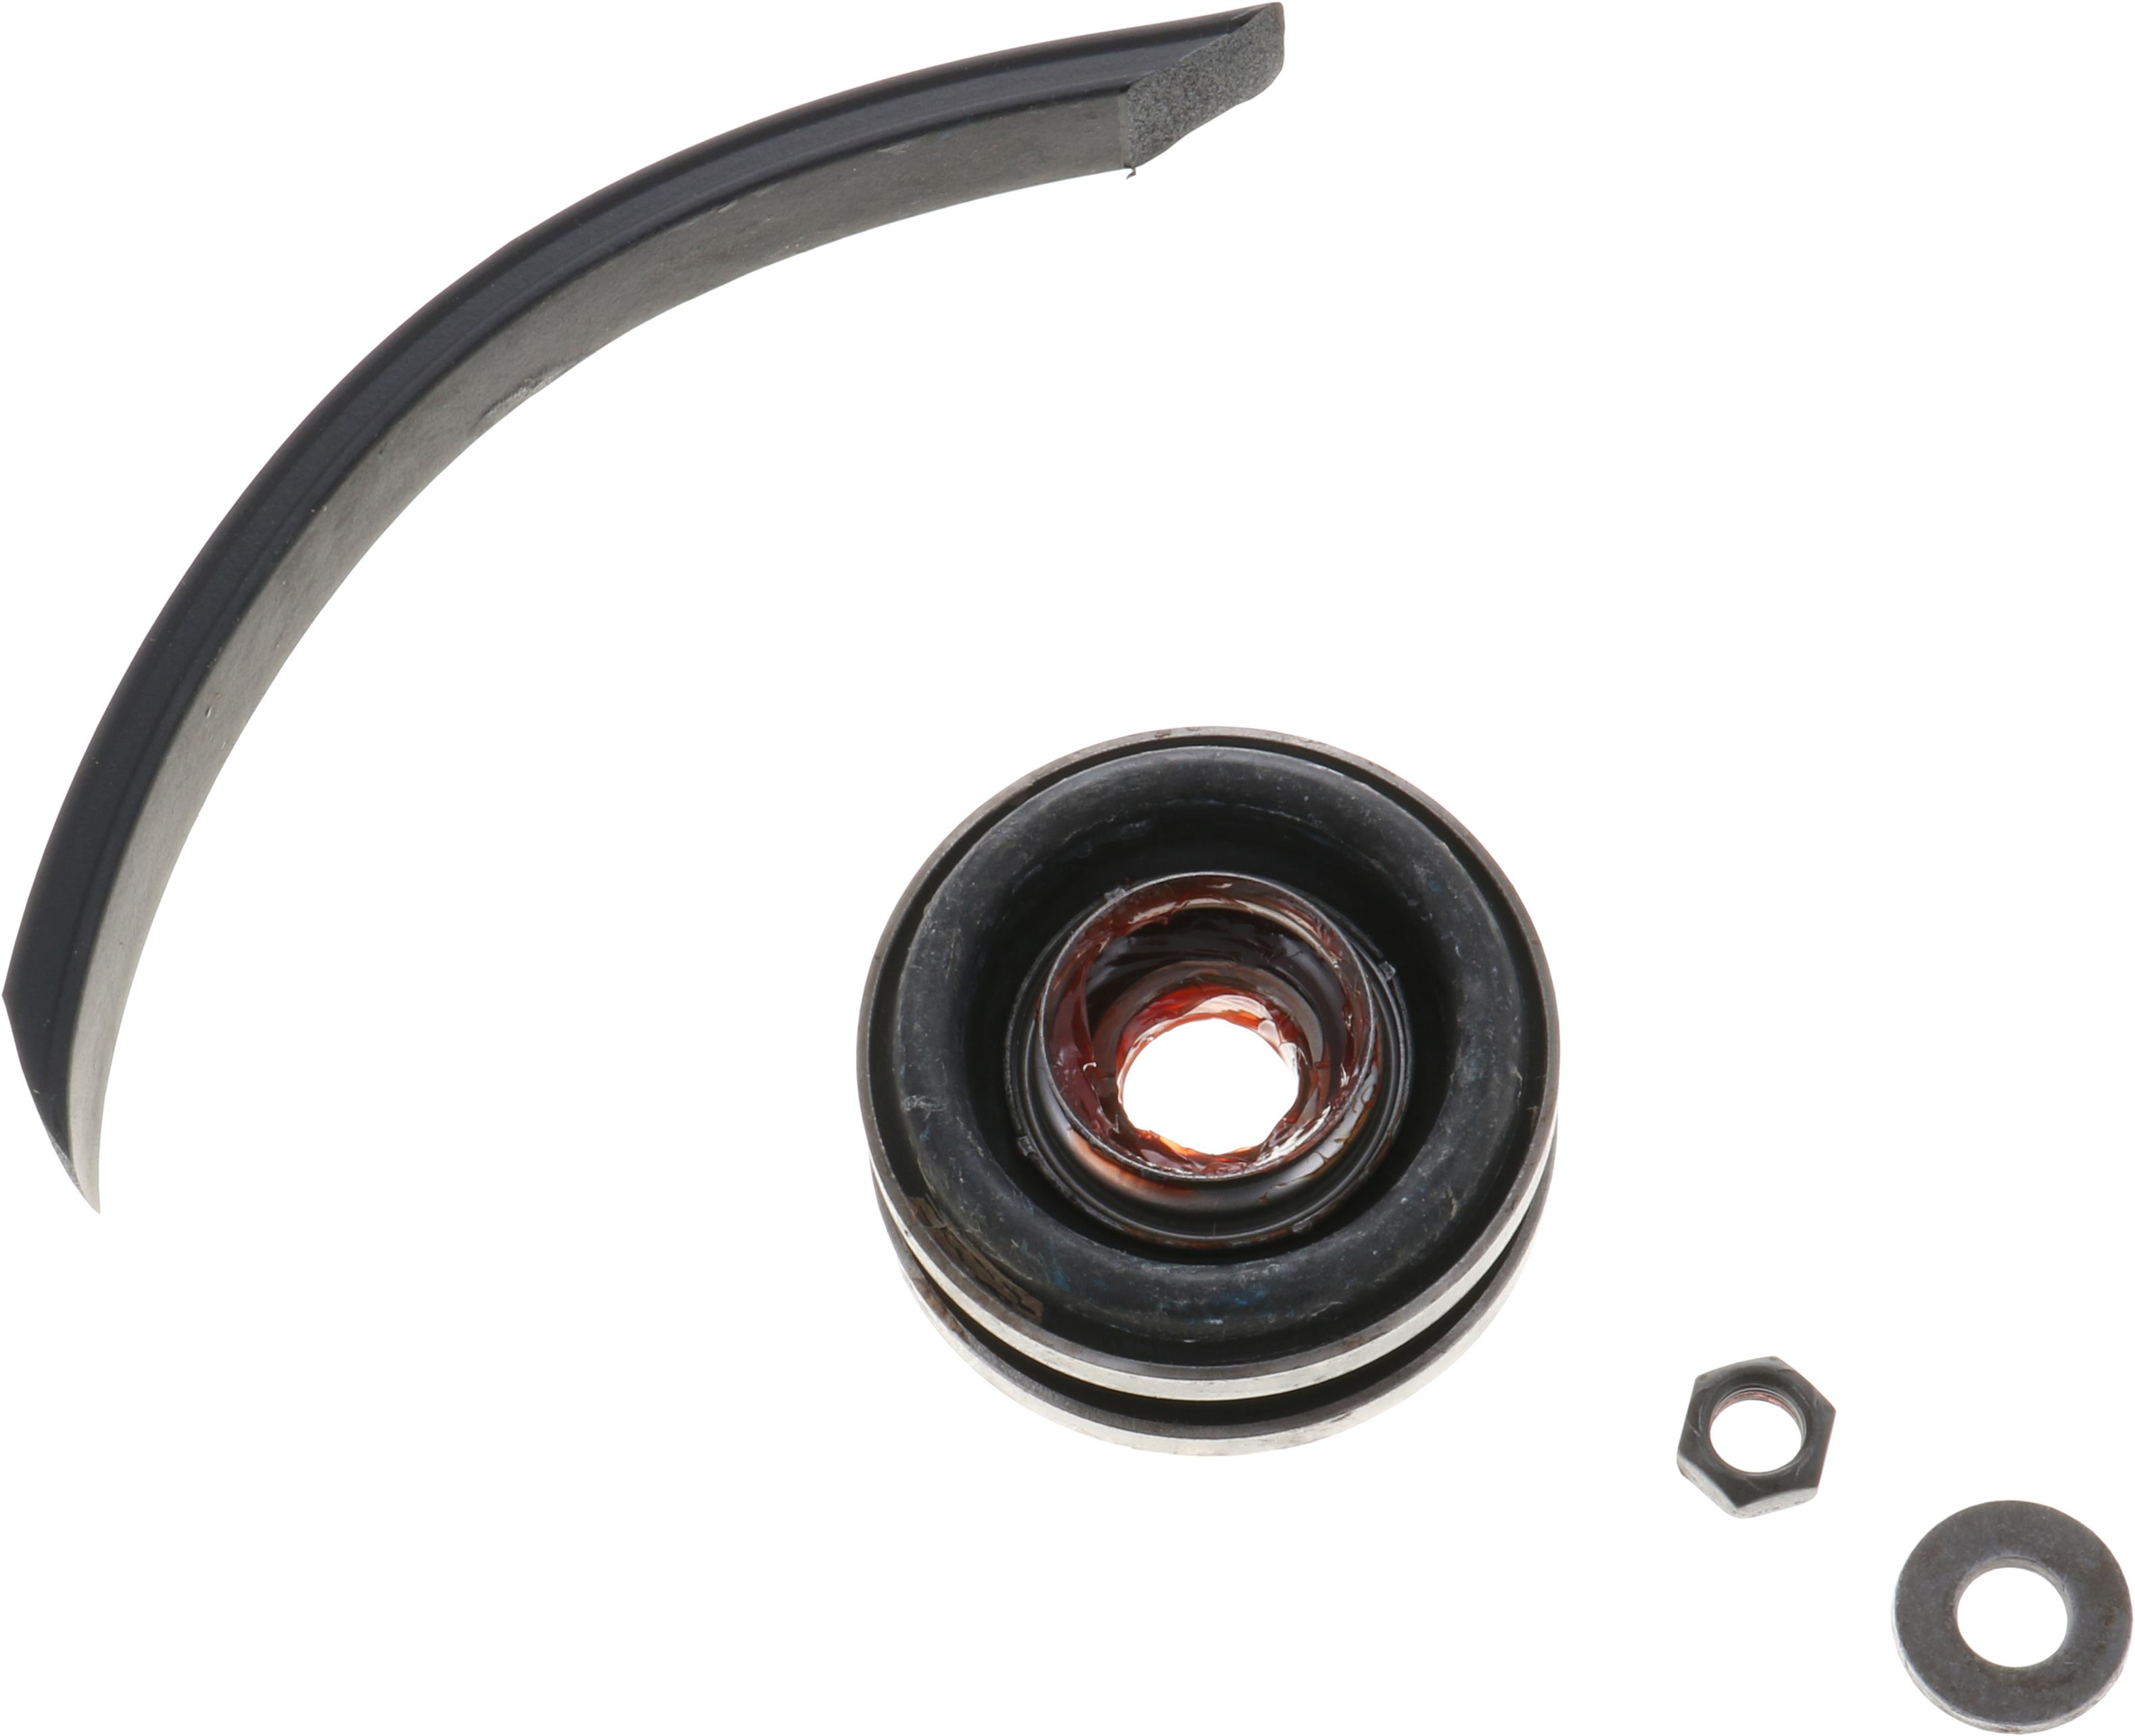 2003 Nissan Frontier King Cab SE Drive Shaft Center Support Bearing -  37521-S3825 - Genuine Nissan Part